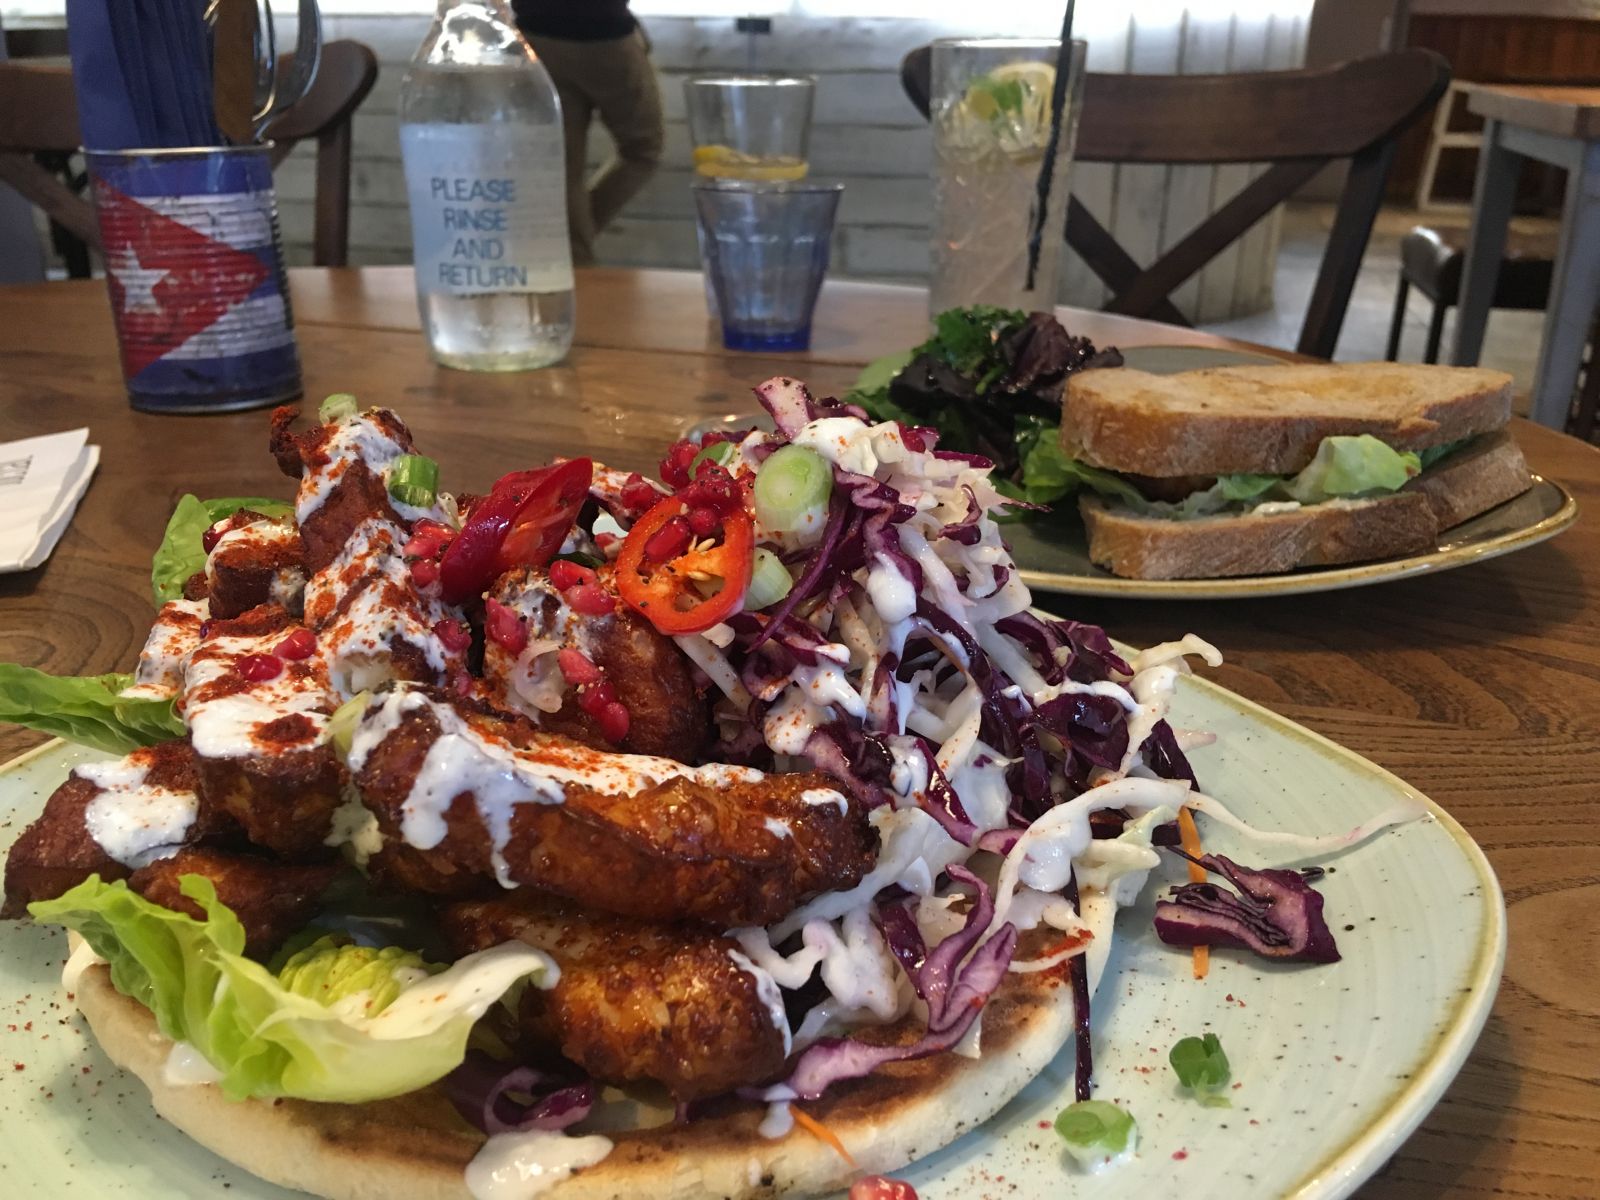 The Halloumi Kebab and Famous Fish Finger Sandwich at The Prince Street Social.